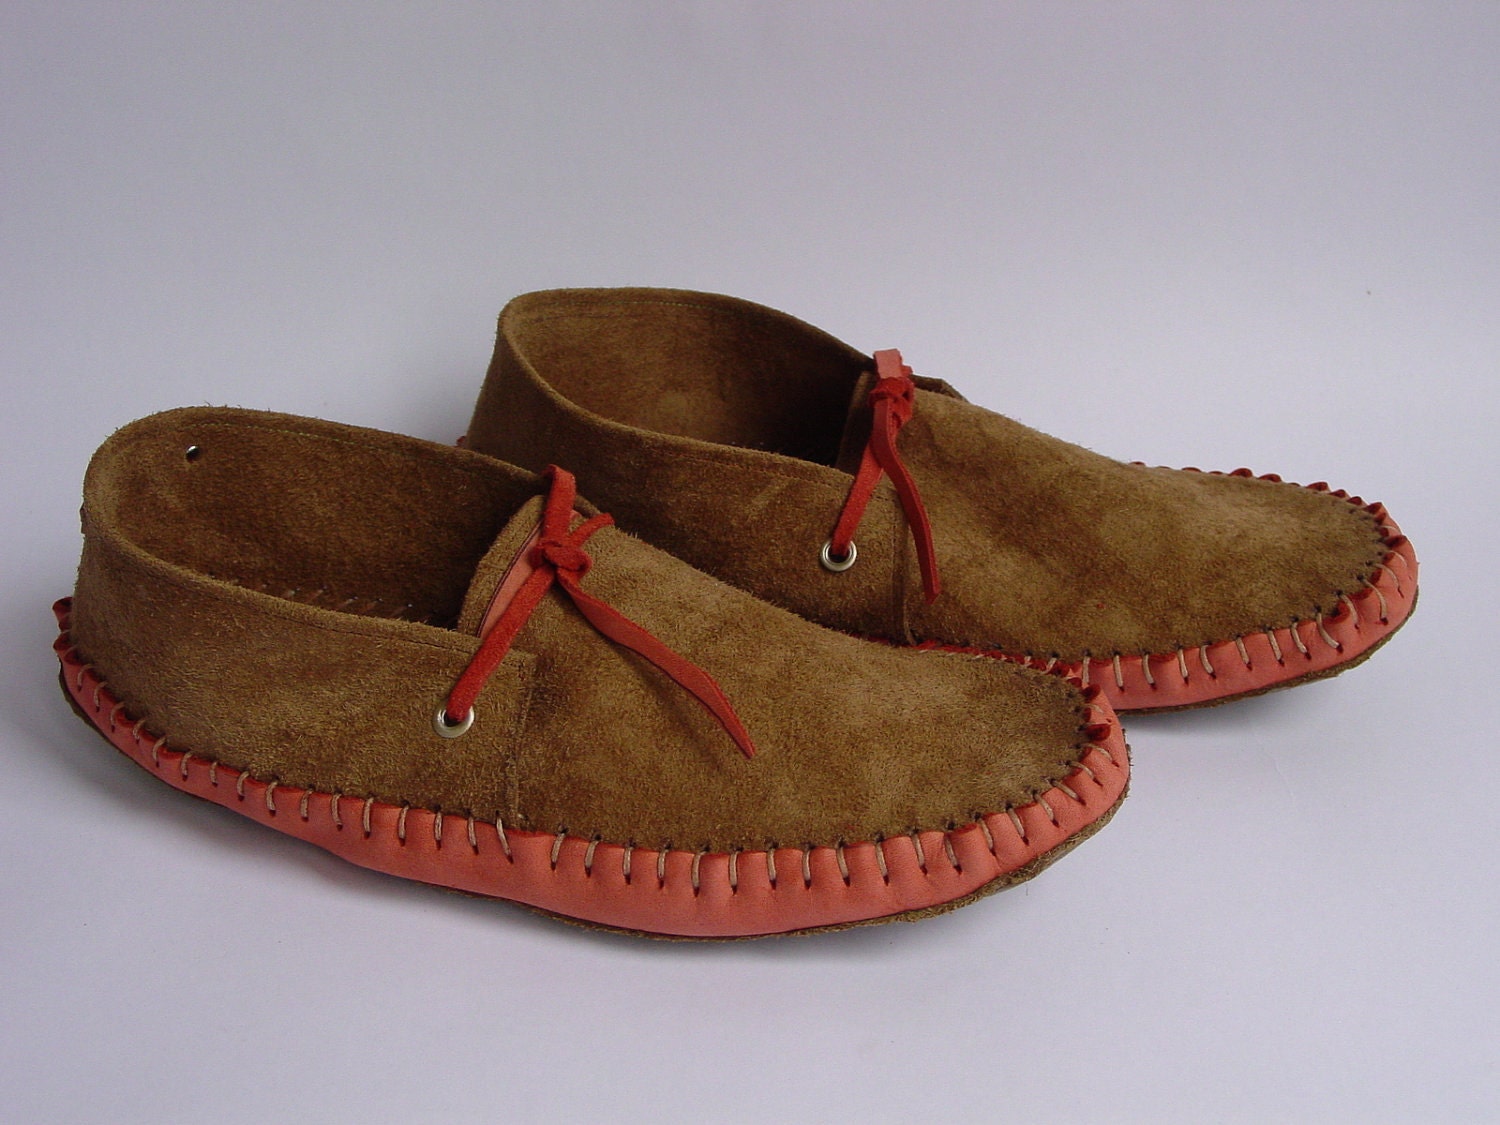 Warm brown suede and coral colored moccasins